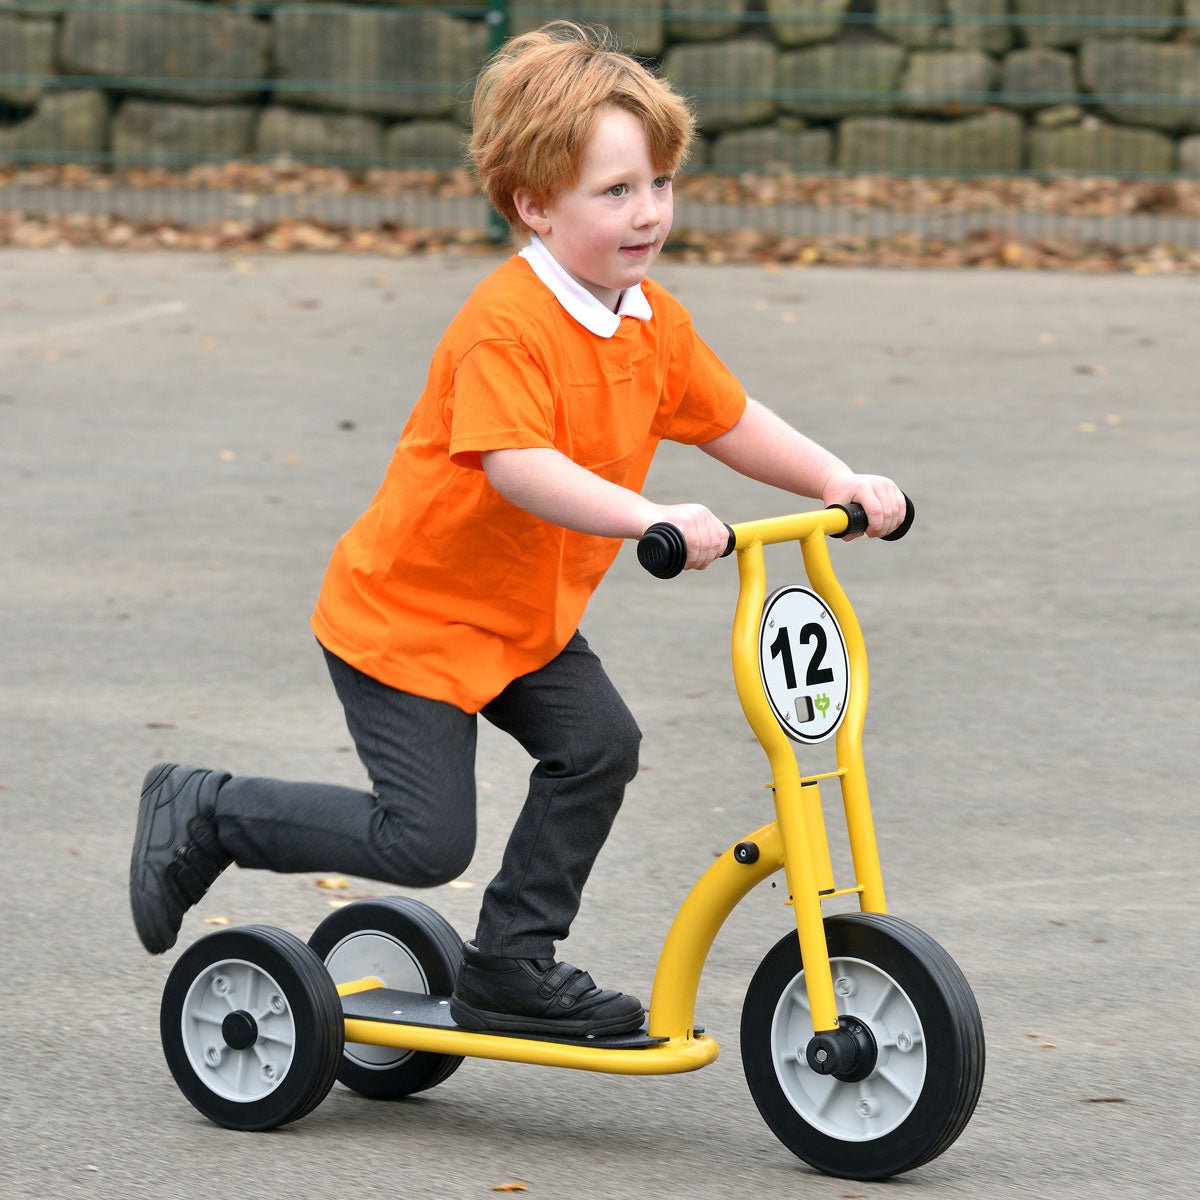 Trike Scooter | Learning and Exploring Through Play